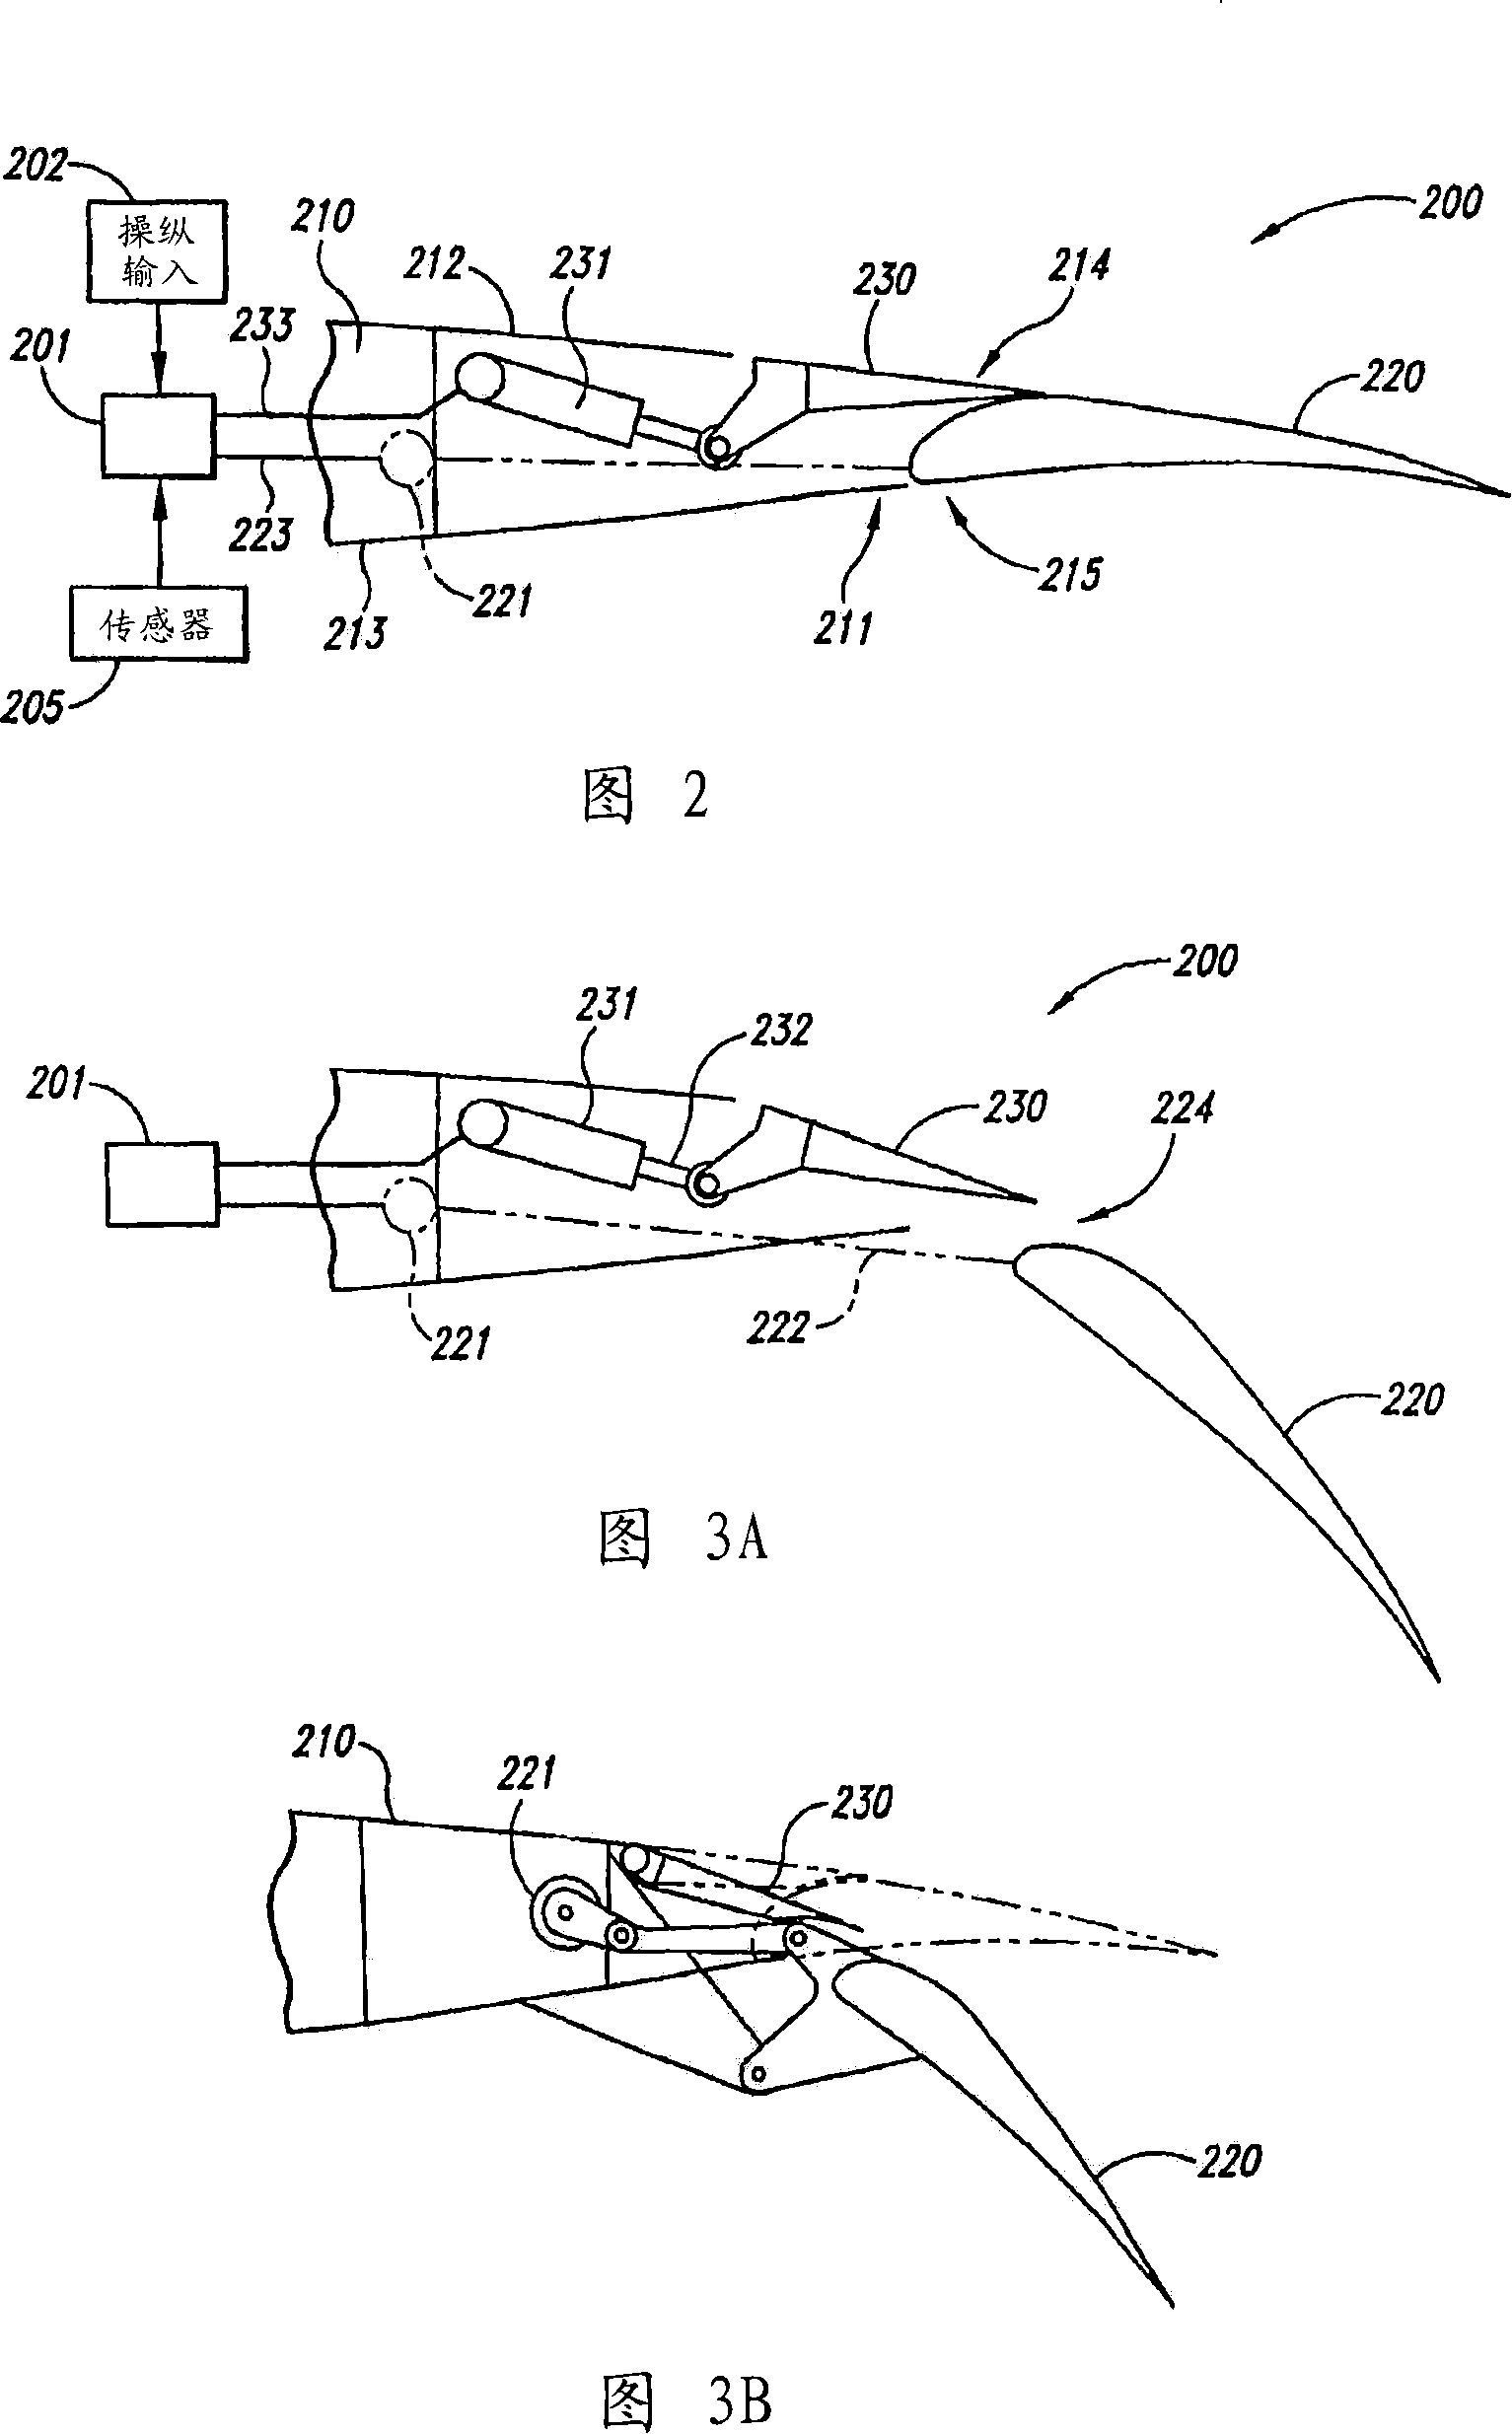 Systems and methods for controlling aircraft flaps and spoilers